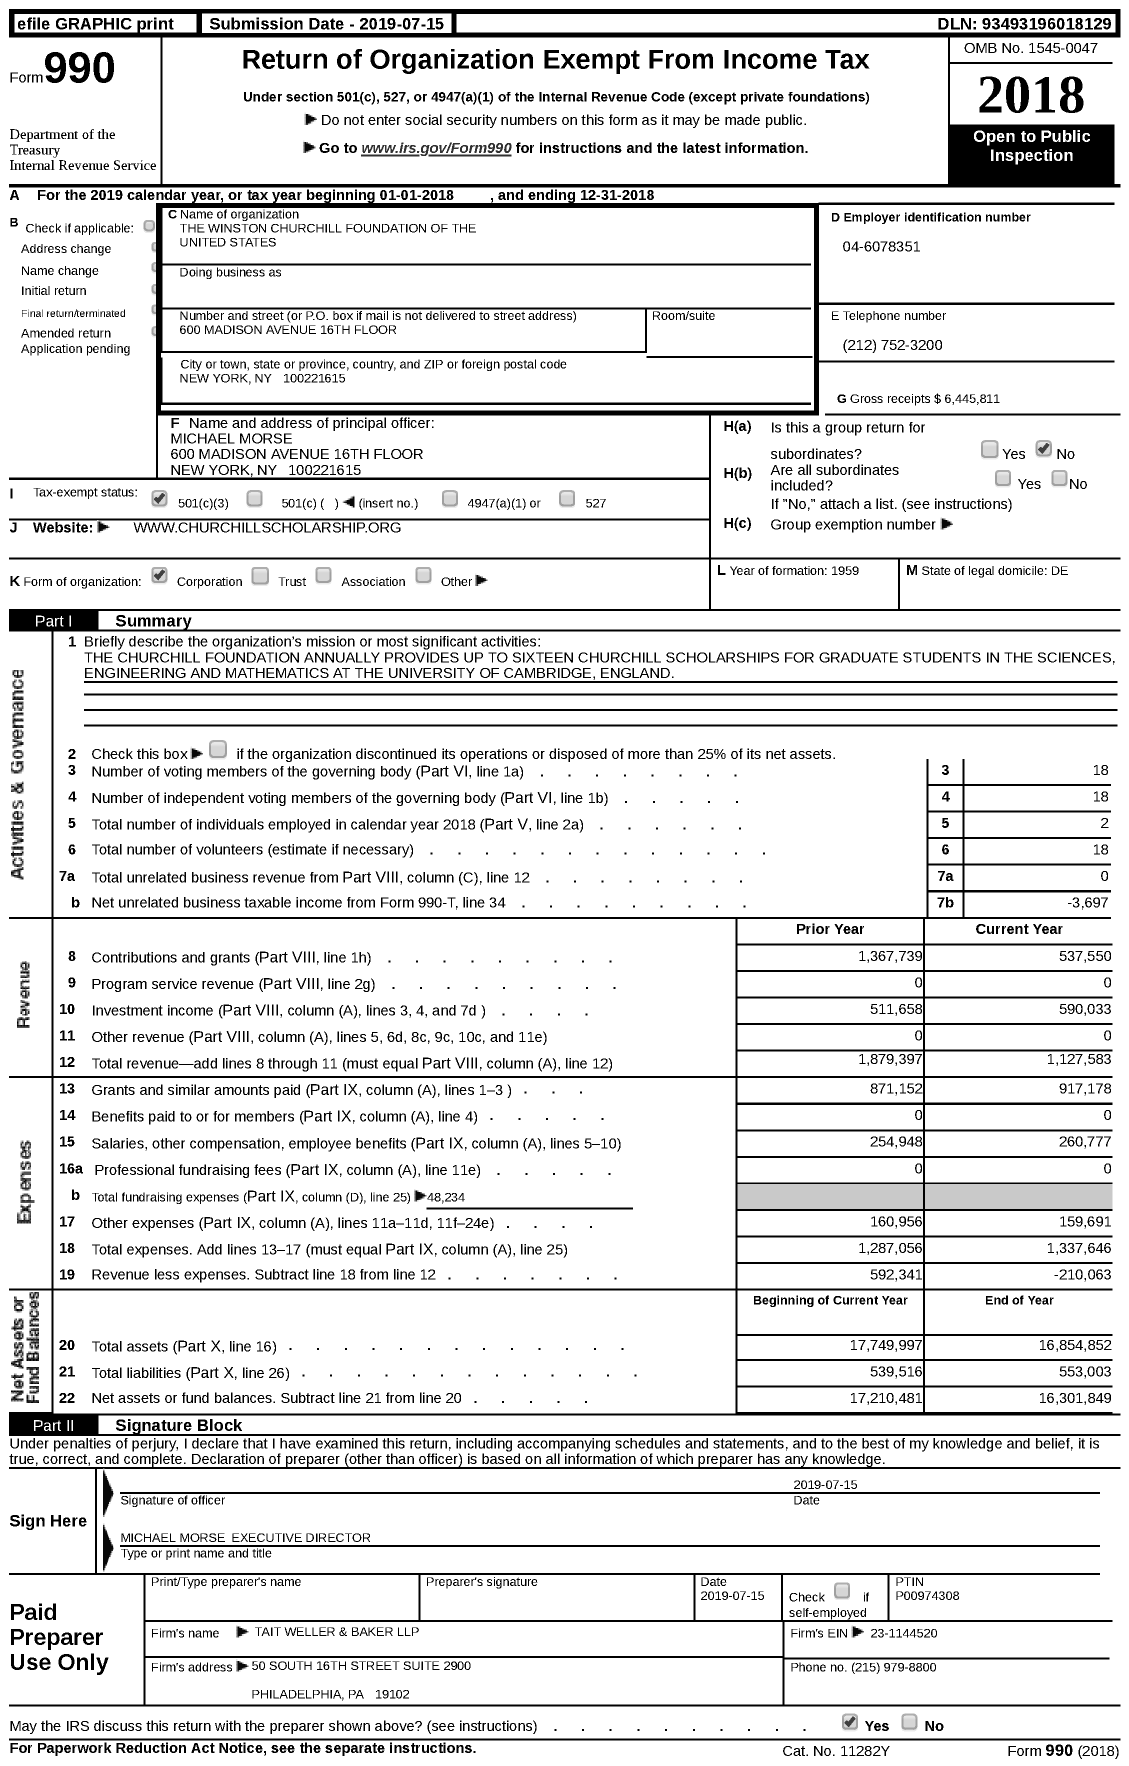 Image of first page of 2018 Form 990 for The Winston Churchill Foundation of the United States